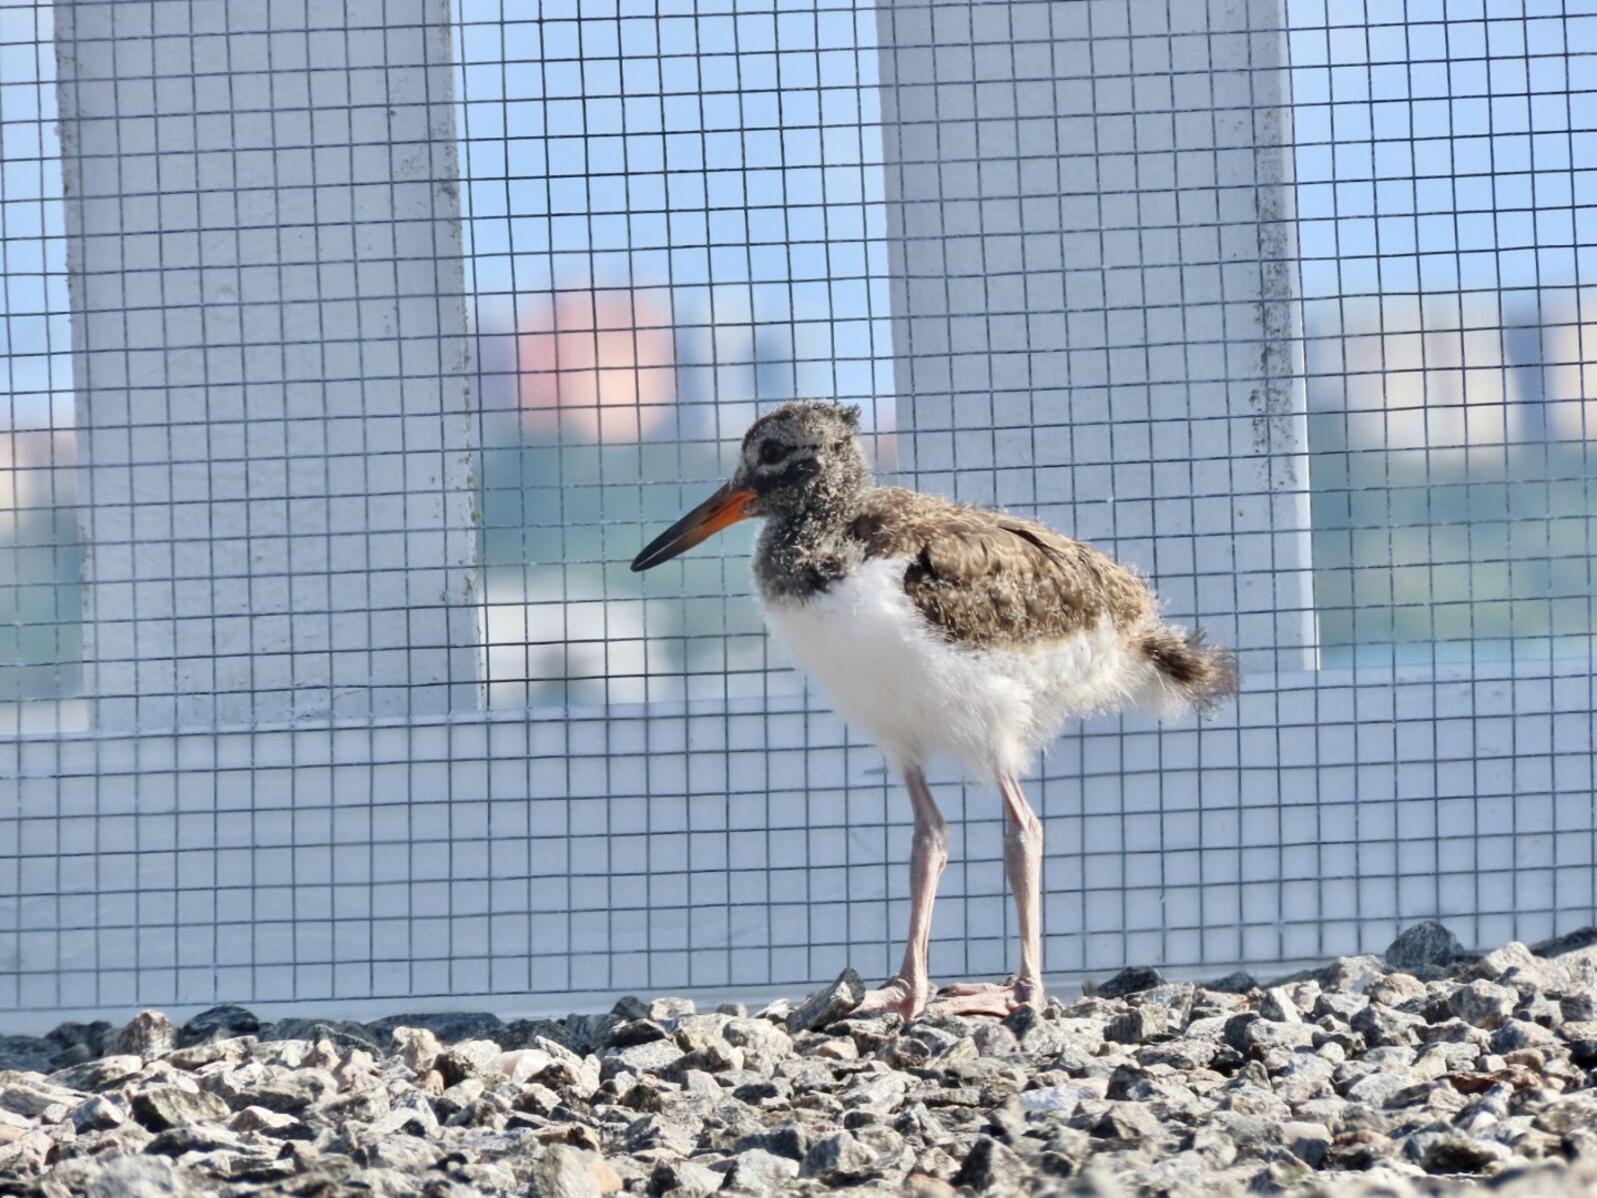 A juvenile American Oystercatcher stands on a rooftop.